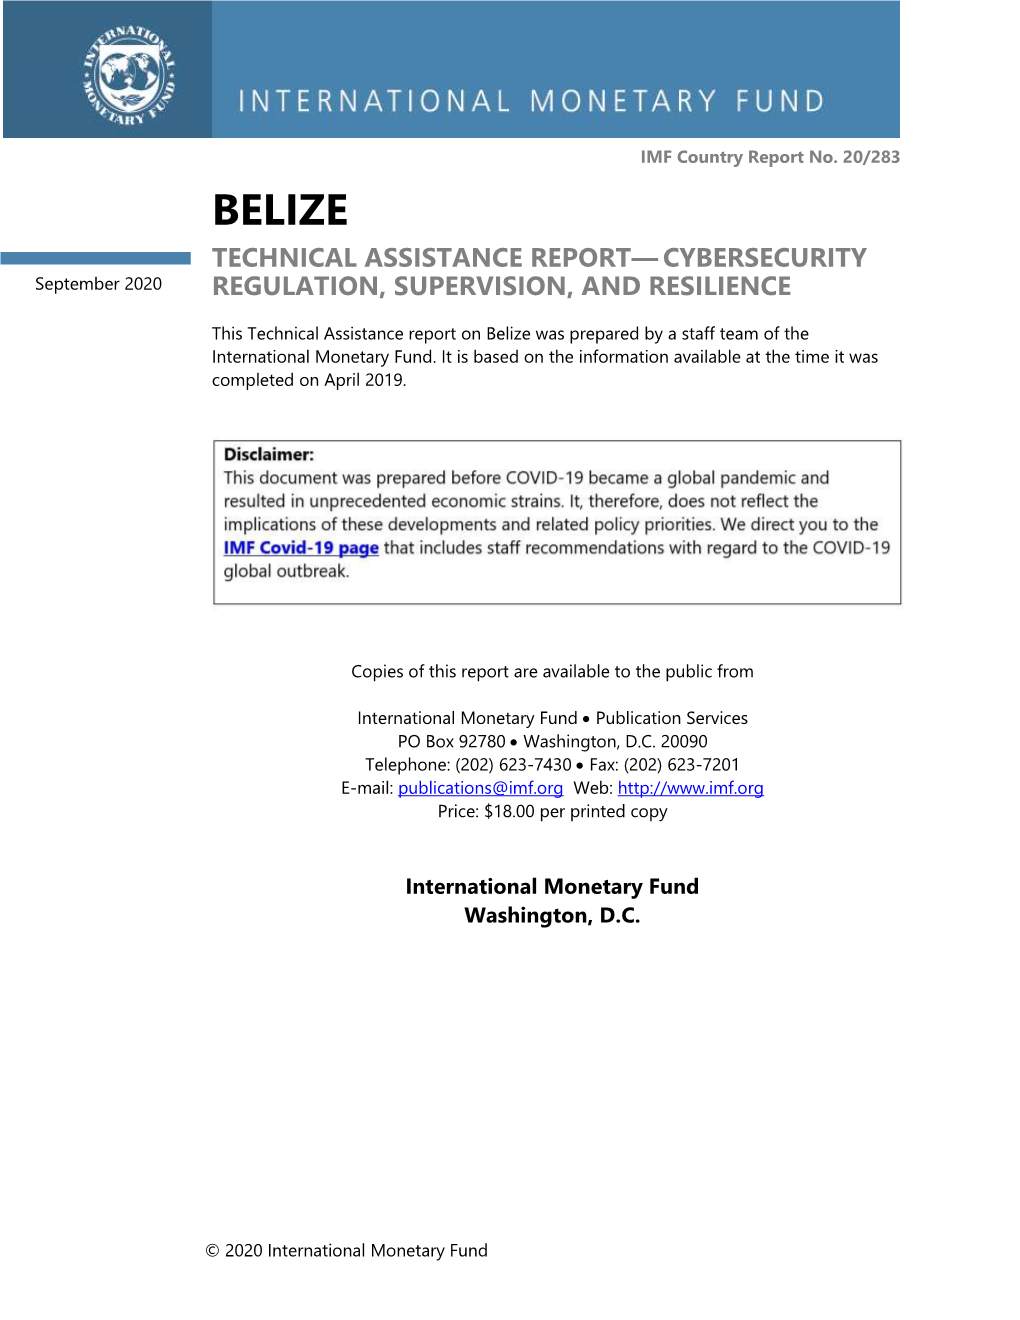 Belize: Technical Assistance Report—Cybersecurity, Regulation